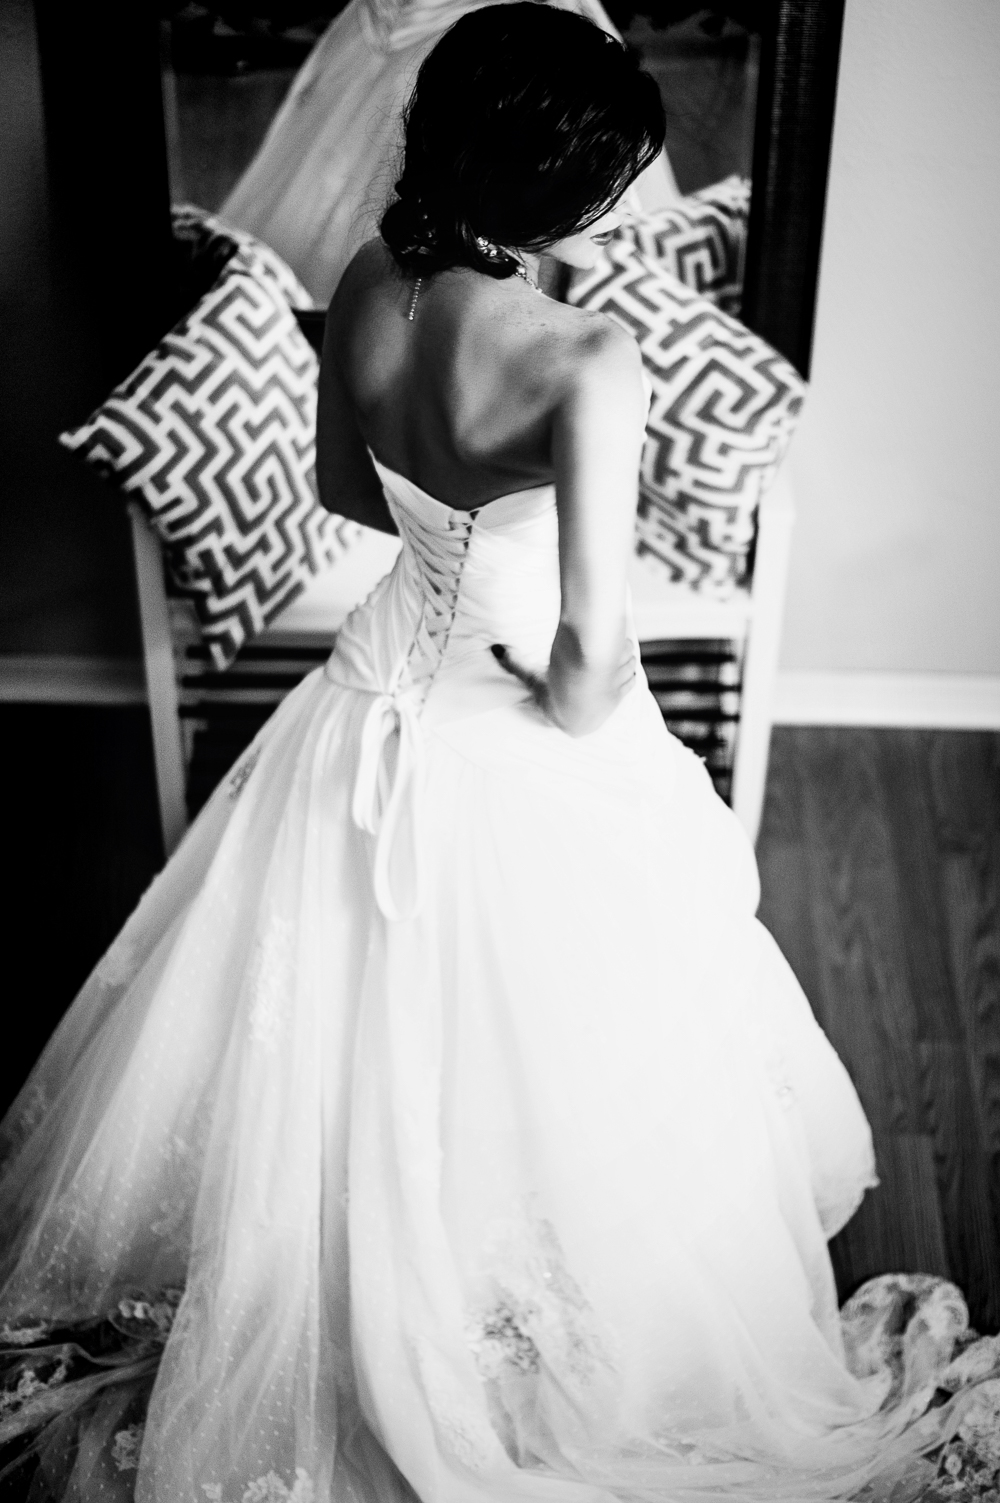 A bride turns away from the mirror and looks over her shoulder